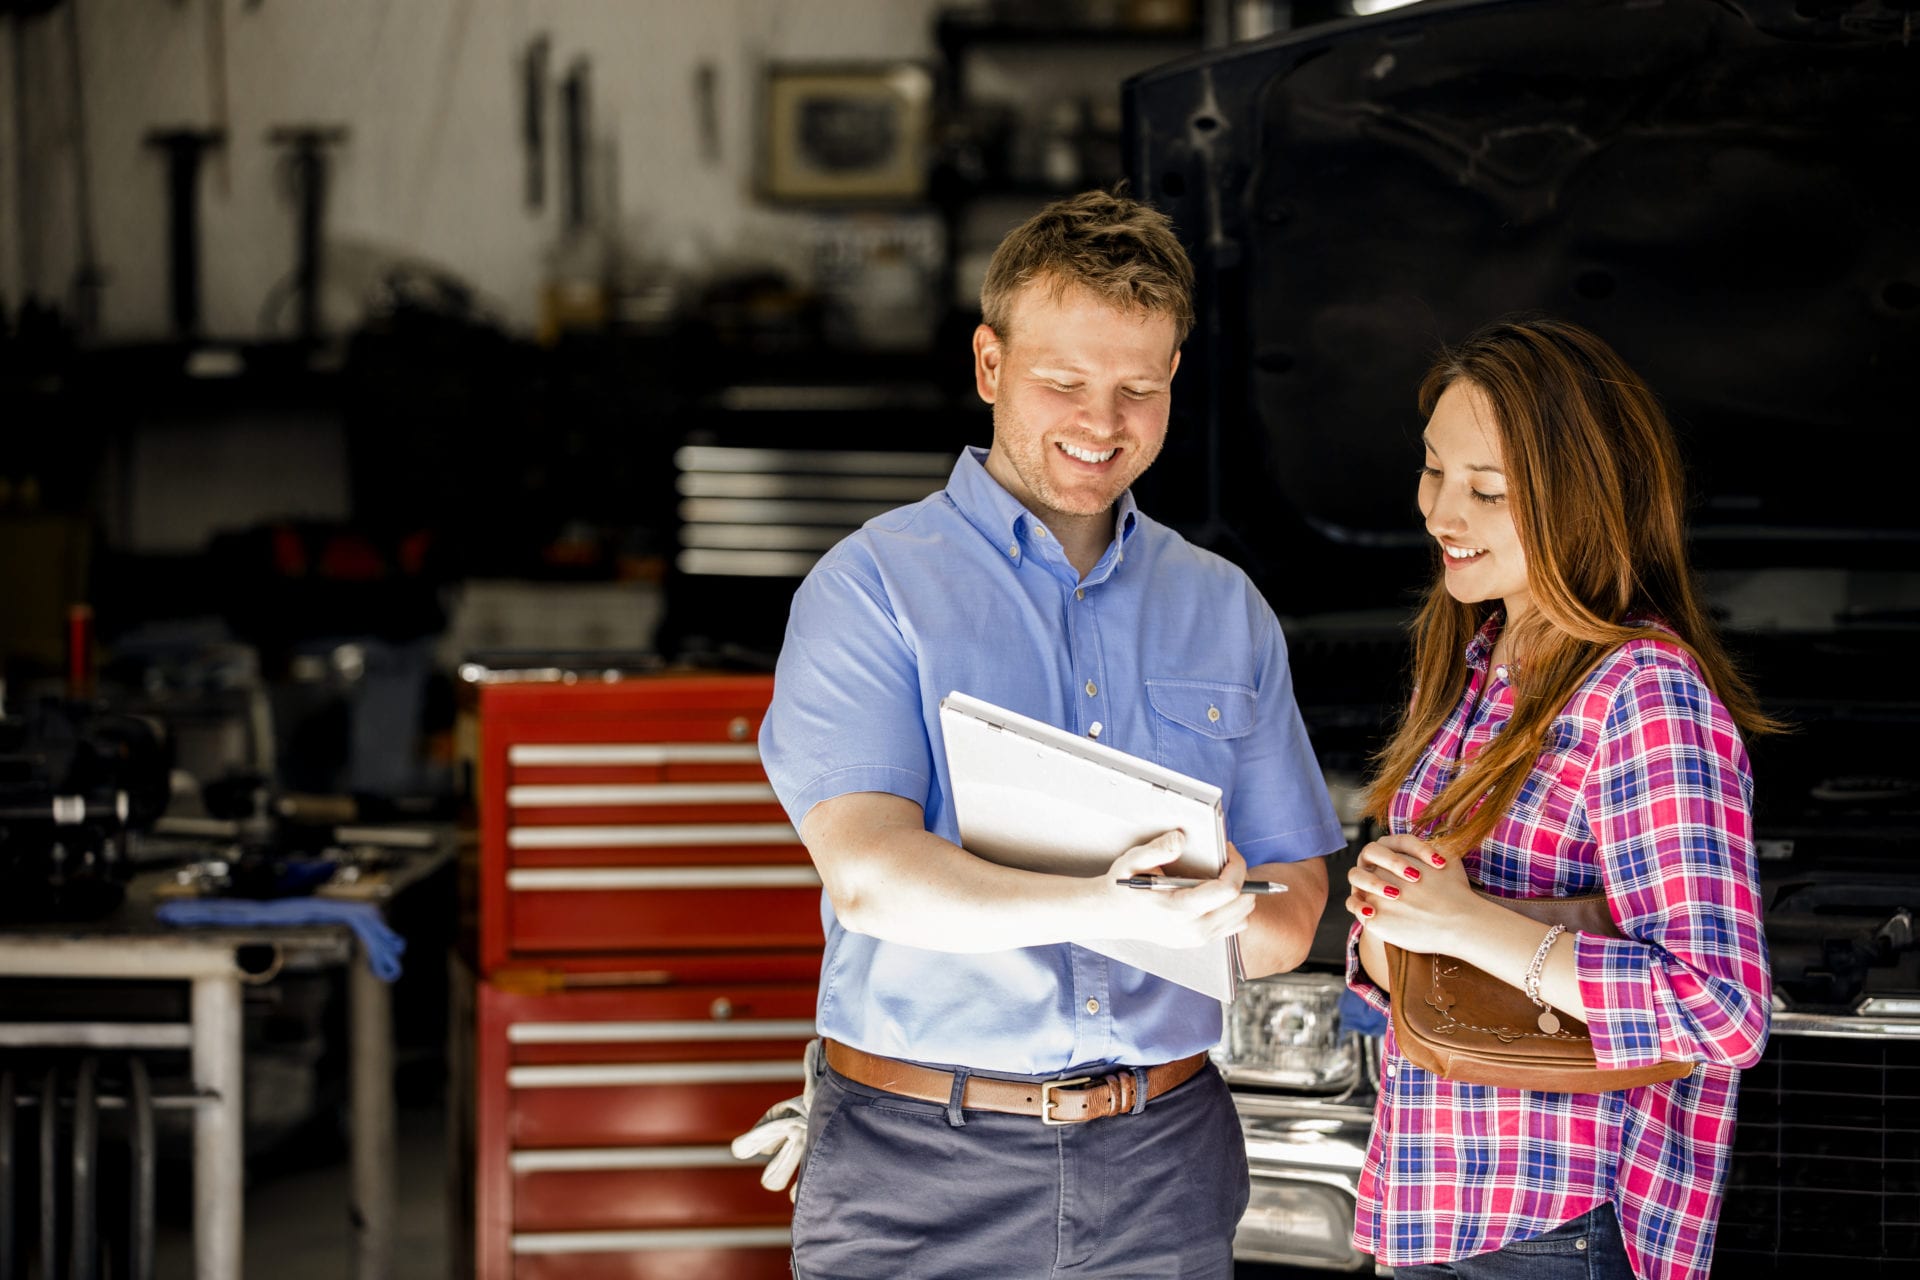 Happy customer!  A smiling Latin descent woman discusses automobile repair invoice with an auto mechanic in a repair shop.  She is discussing the vehicle's repairs with the mechanic, who is explaining her service.  Toolbox, workshop background. Unidentifiable, SUV-style vehicle.